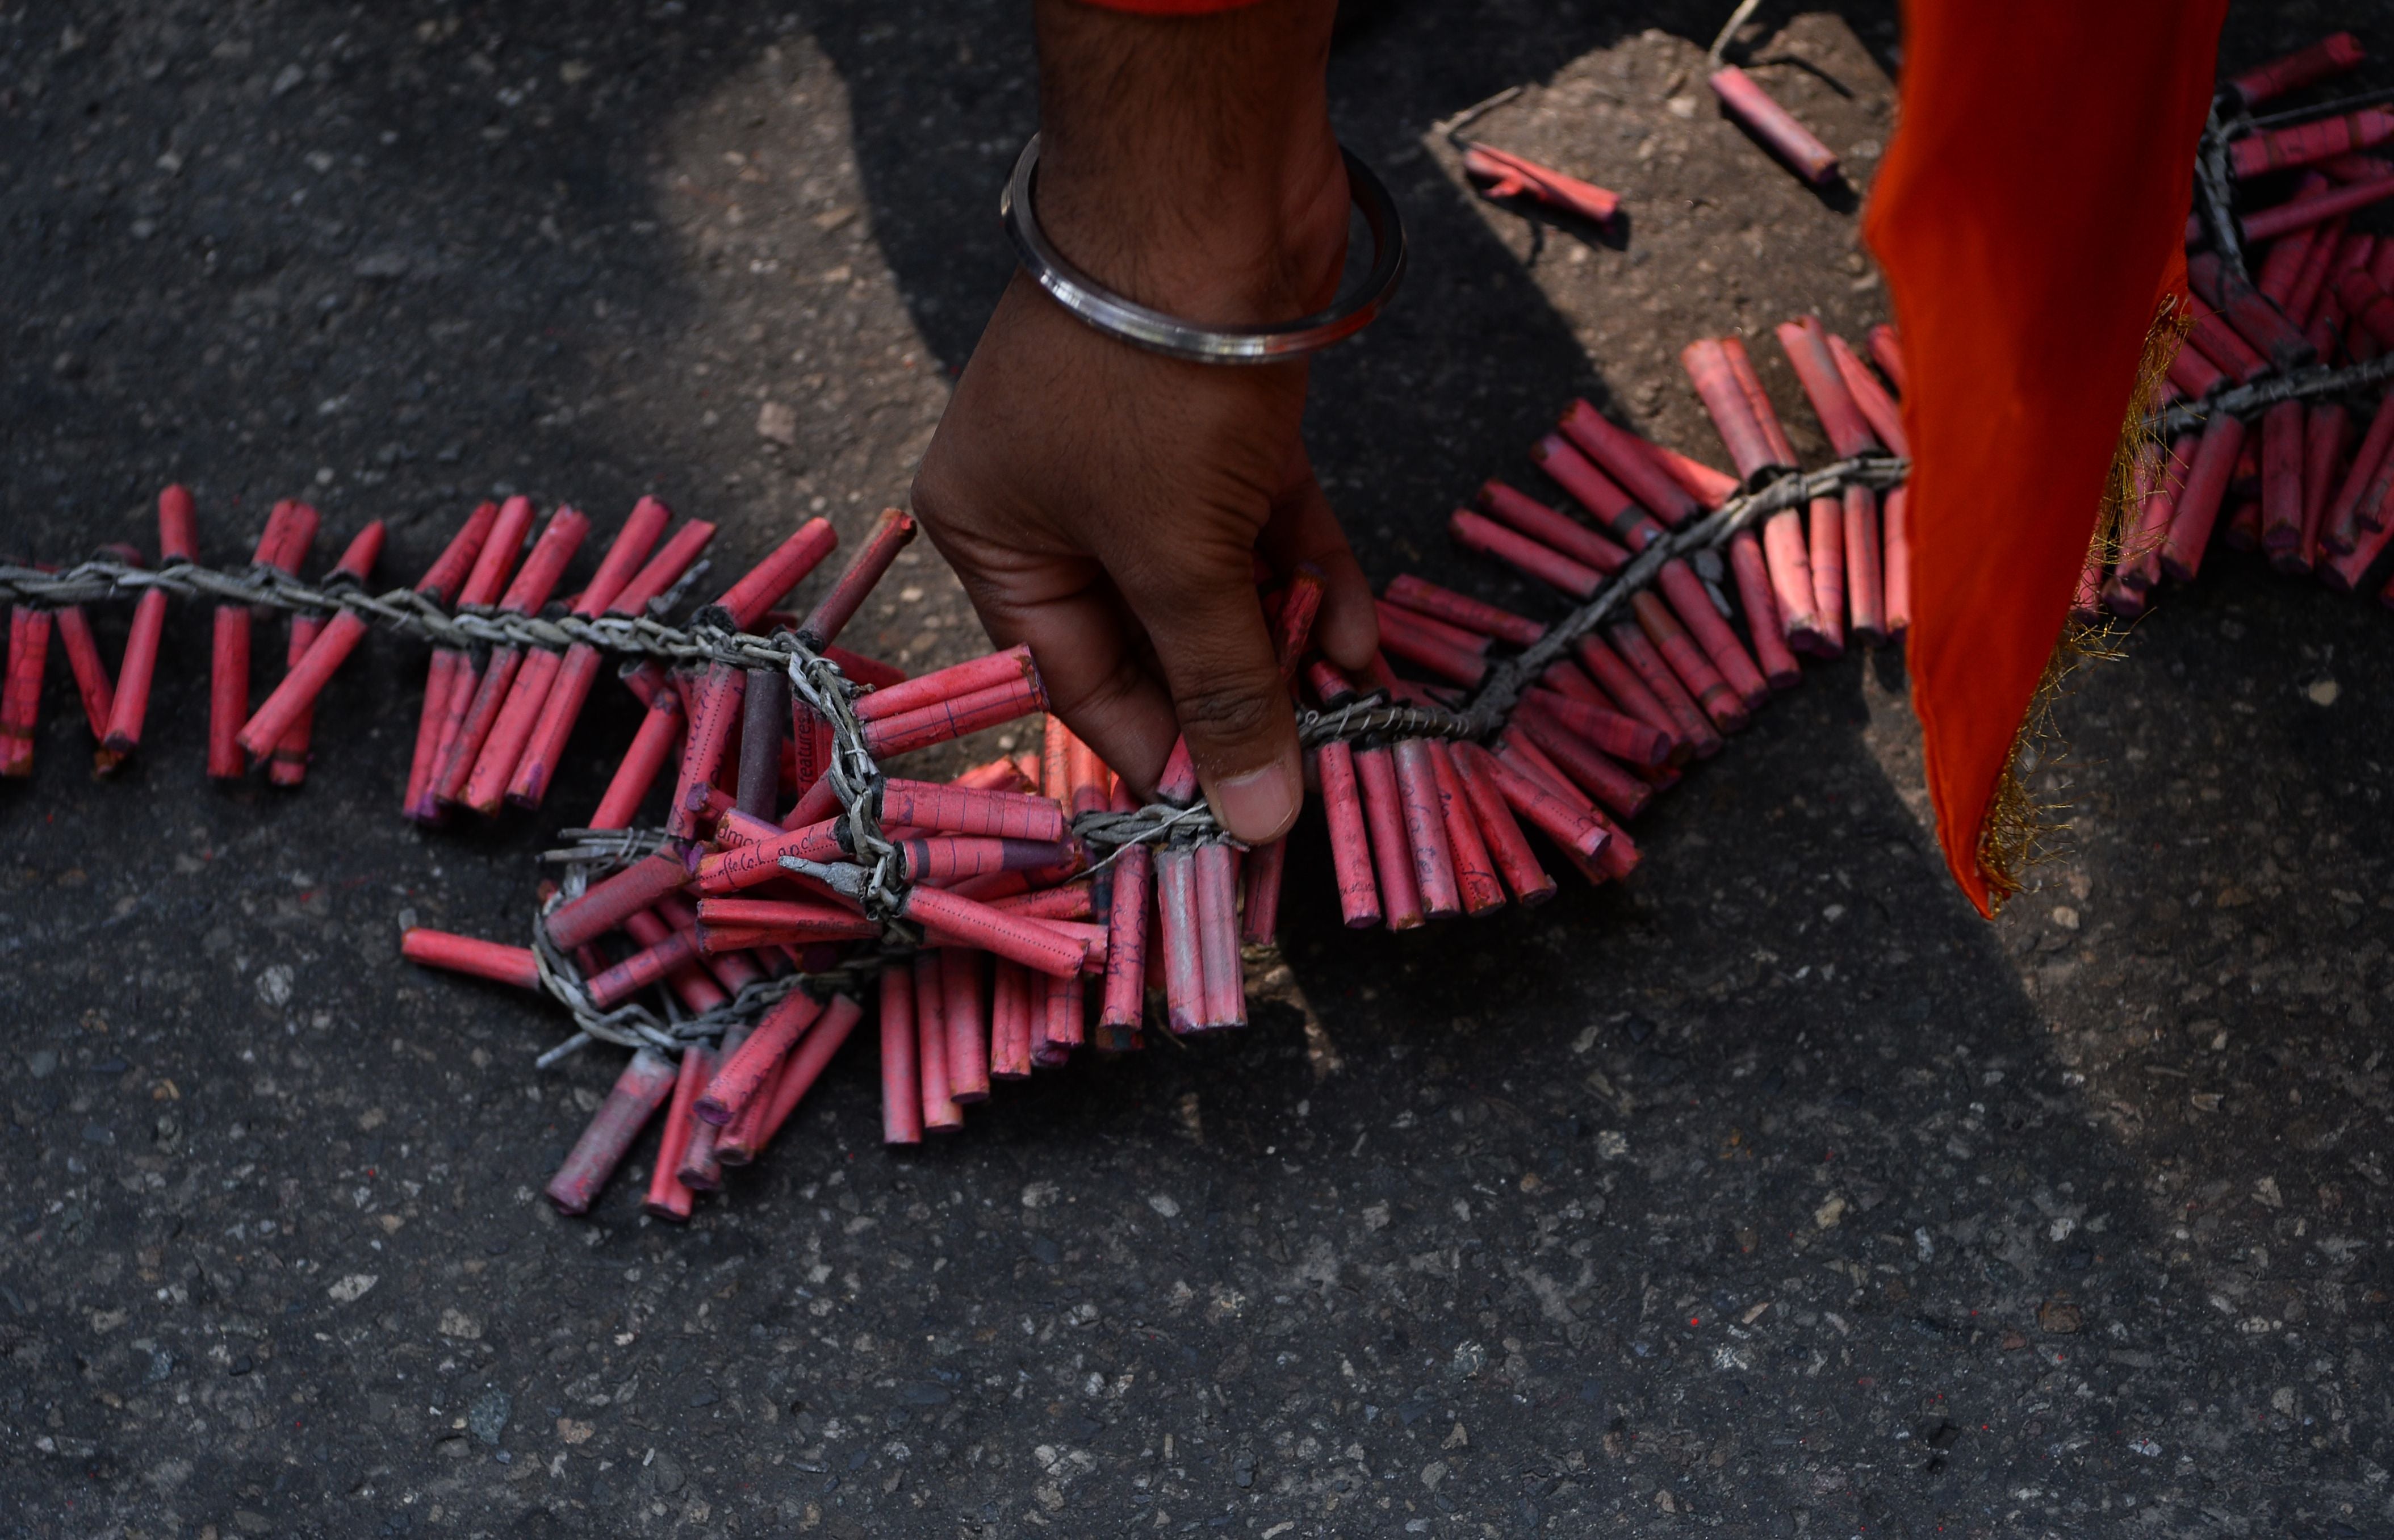 File: A person seeing arranging garlands of firecrackers made up small bombs in New Delhi